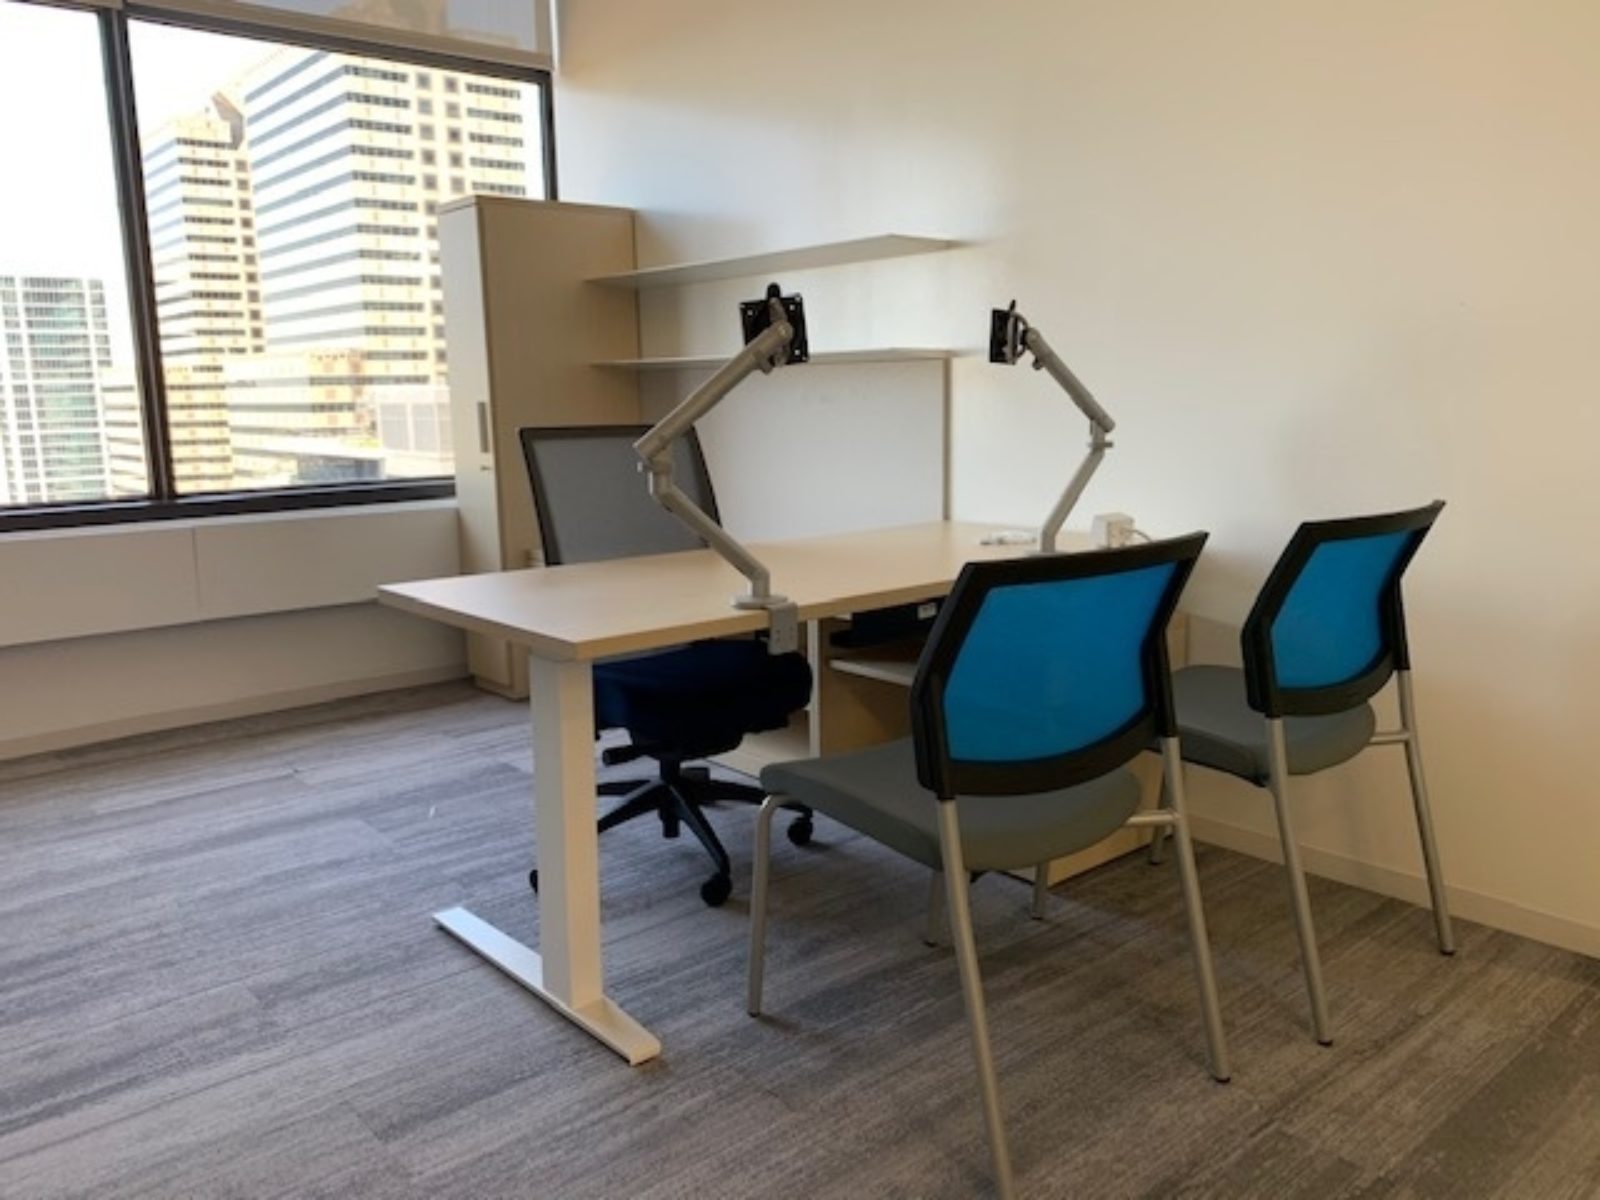 Herman Miller private office with height-adjustable desk, open shelves and storage unit. Desk has one task chair and two guest chairs.